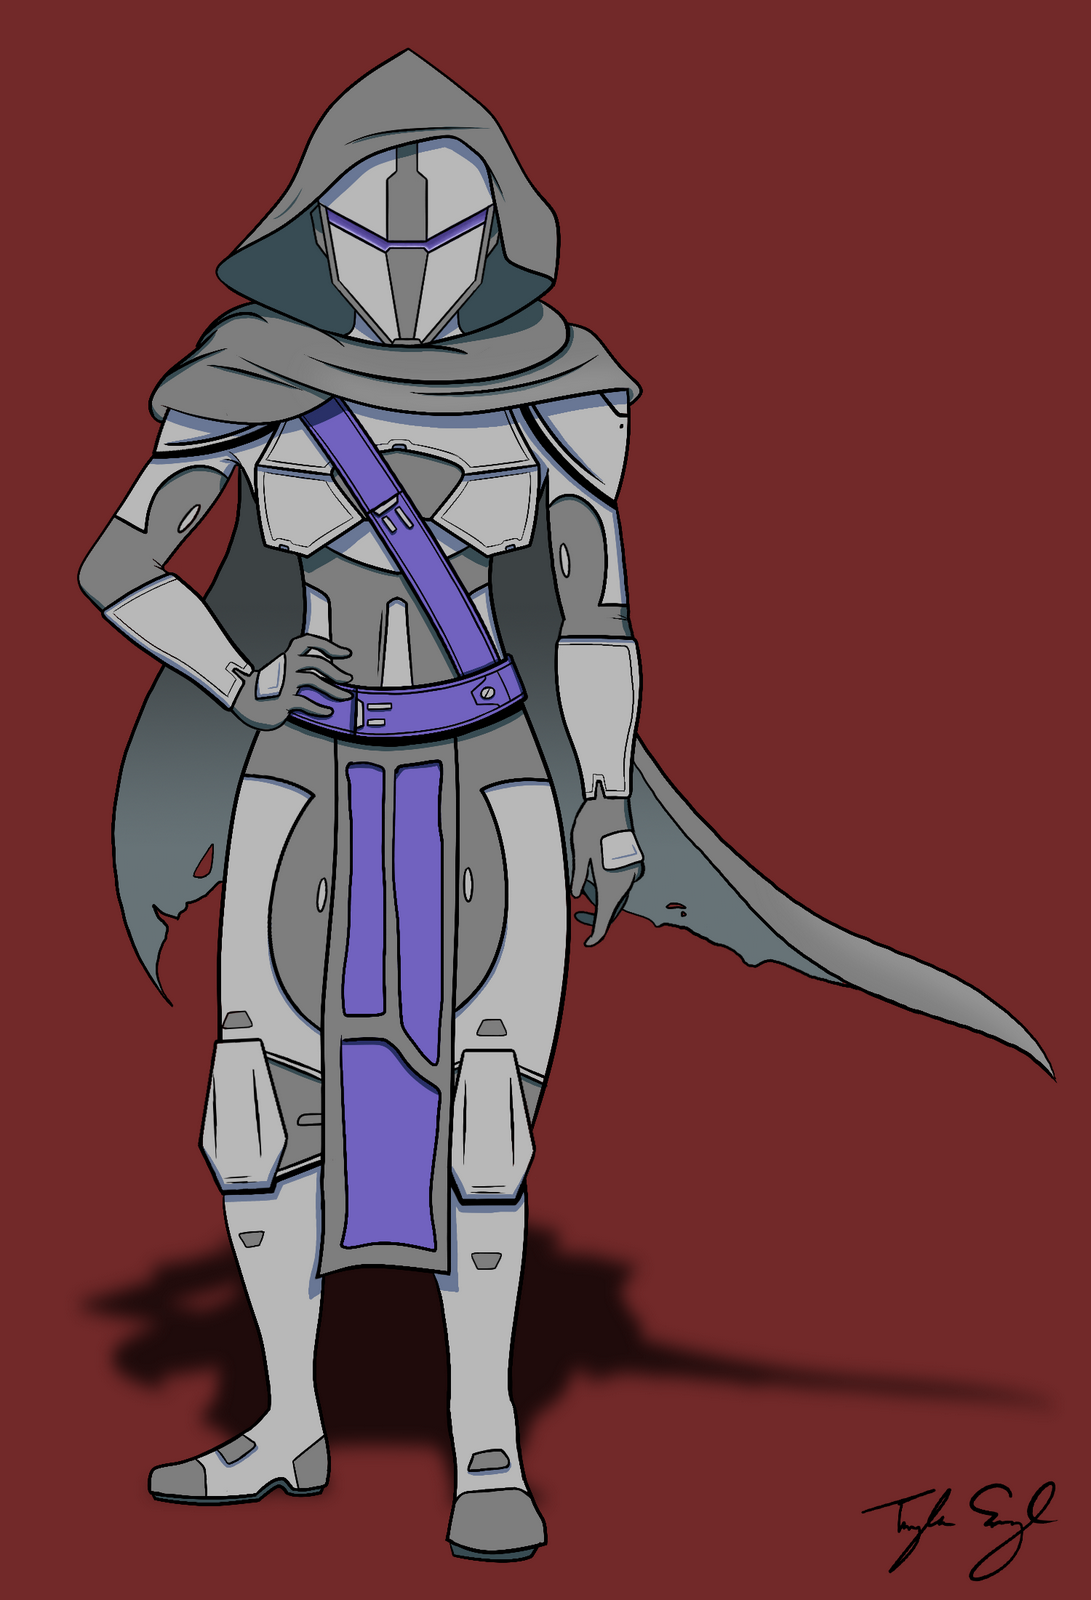 A fierce female warrior, clad in weathered, purple and gray futuristic armor. Her cloak flaps in the breeze.